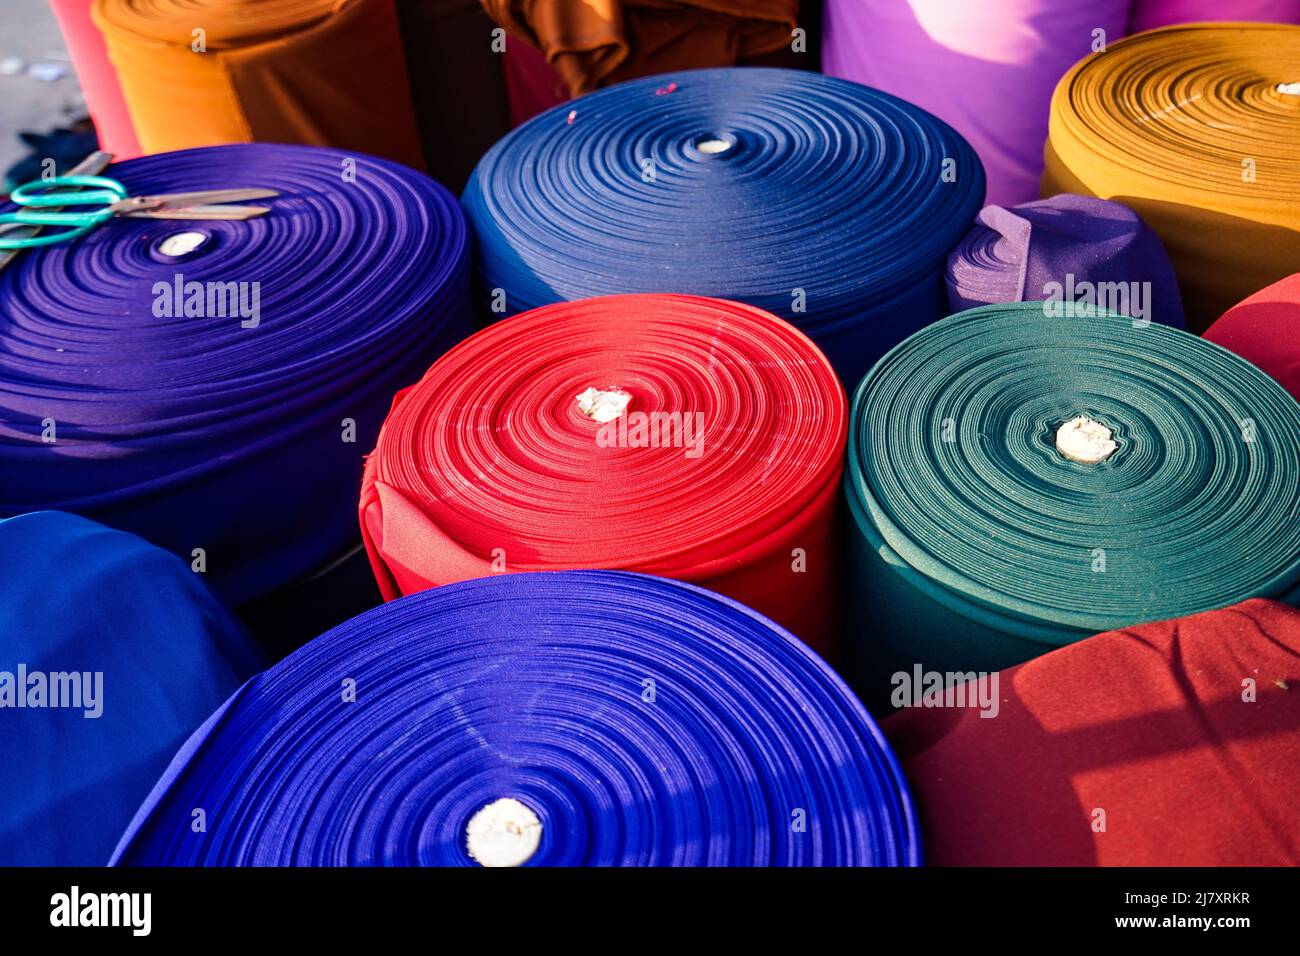 Colorful fabric rolls at a Vietnamese fabric market Stock Photo